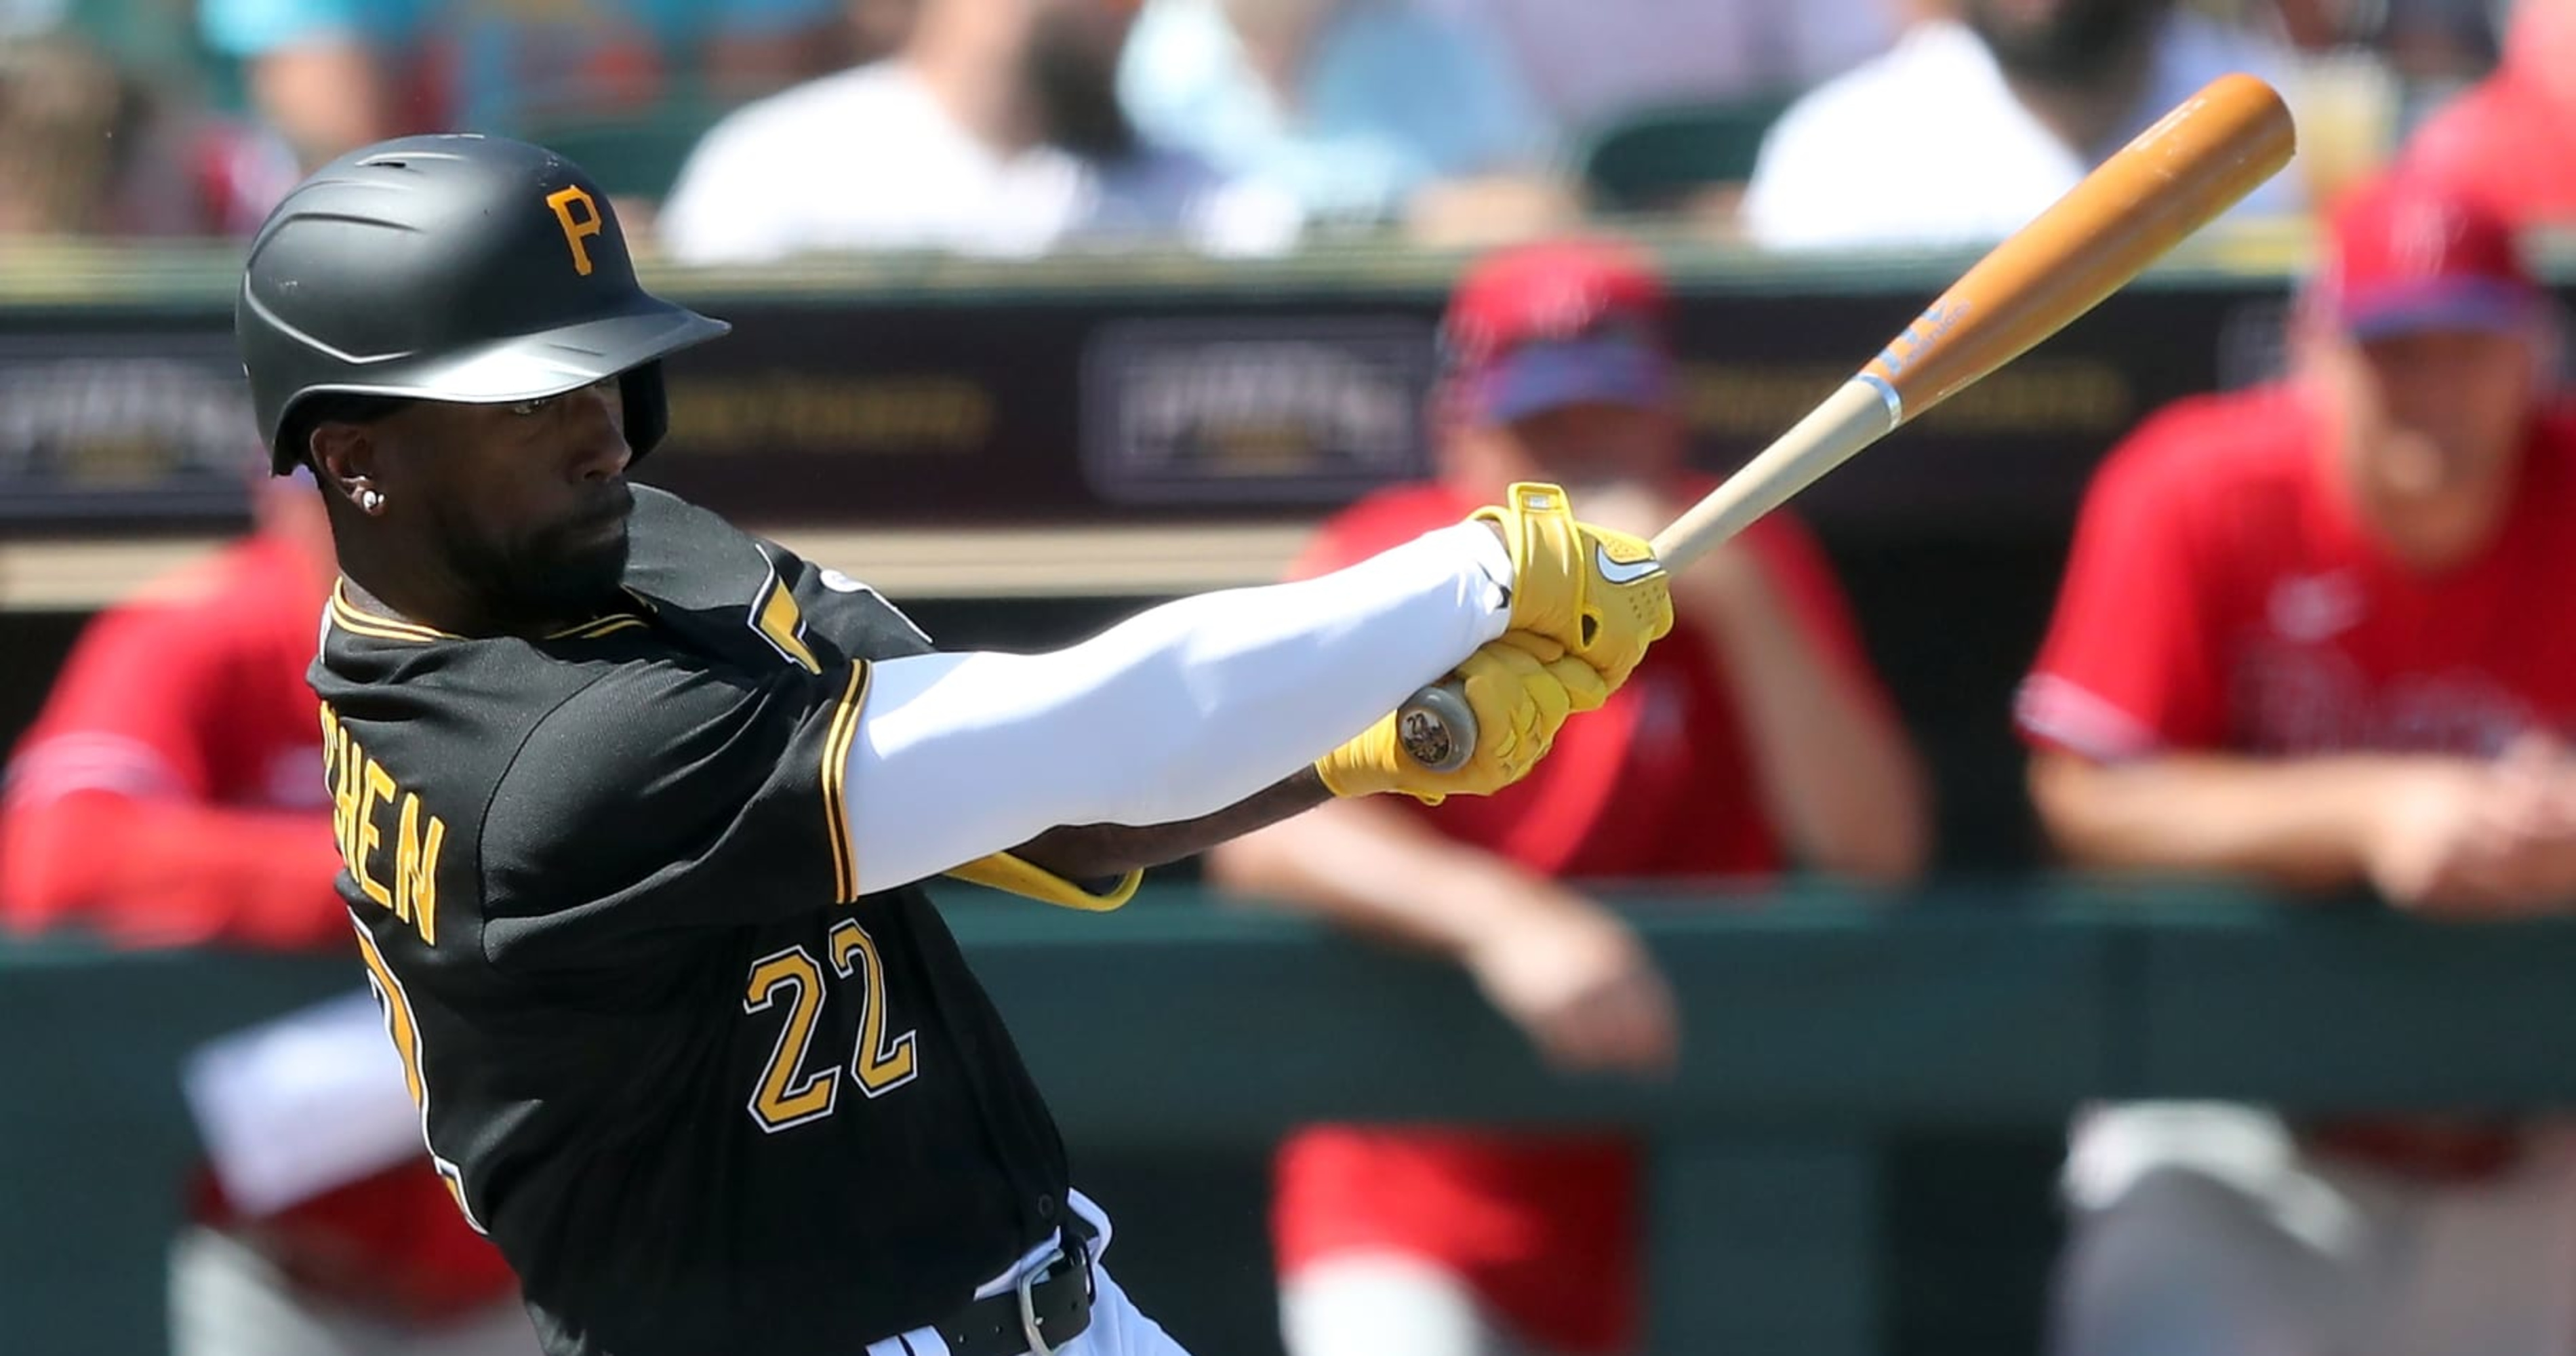 Andrew McCutchen returns to Pirates as Mets miss out